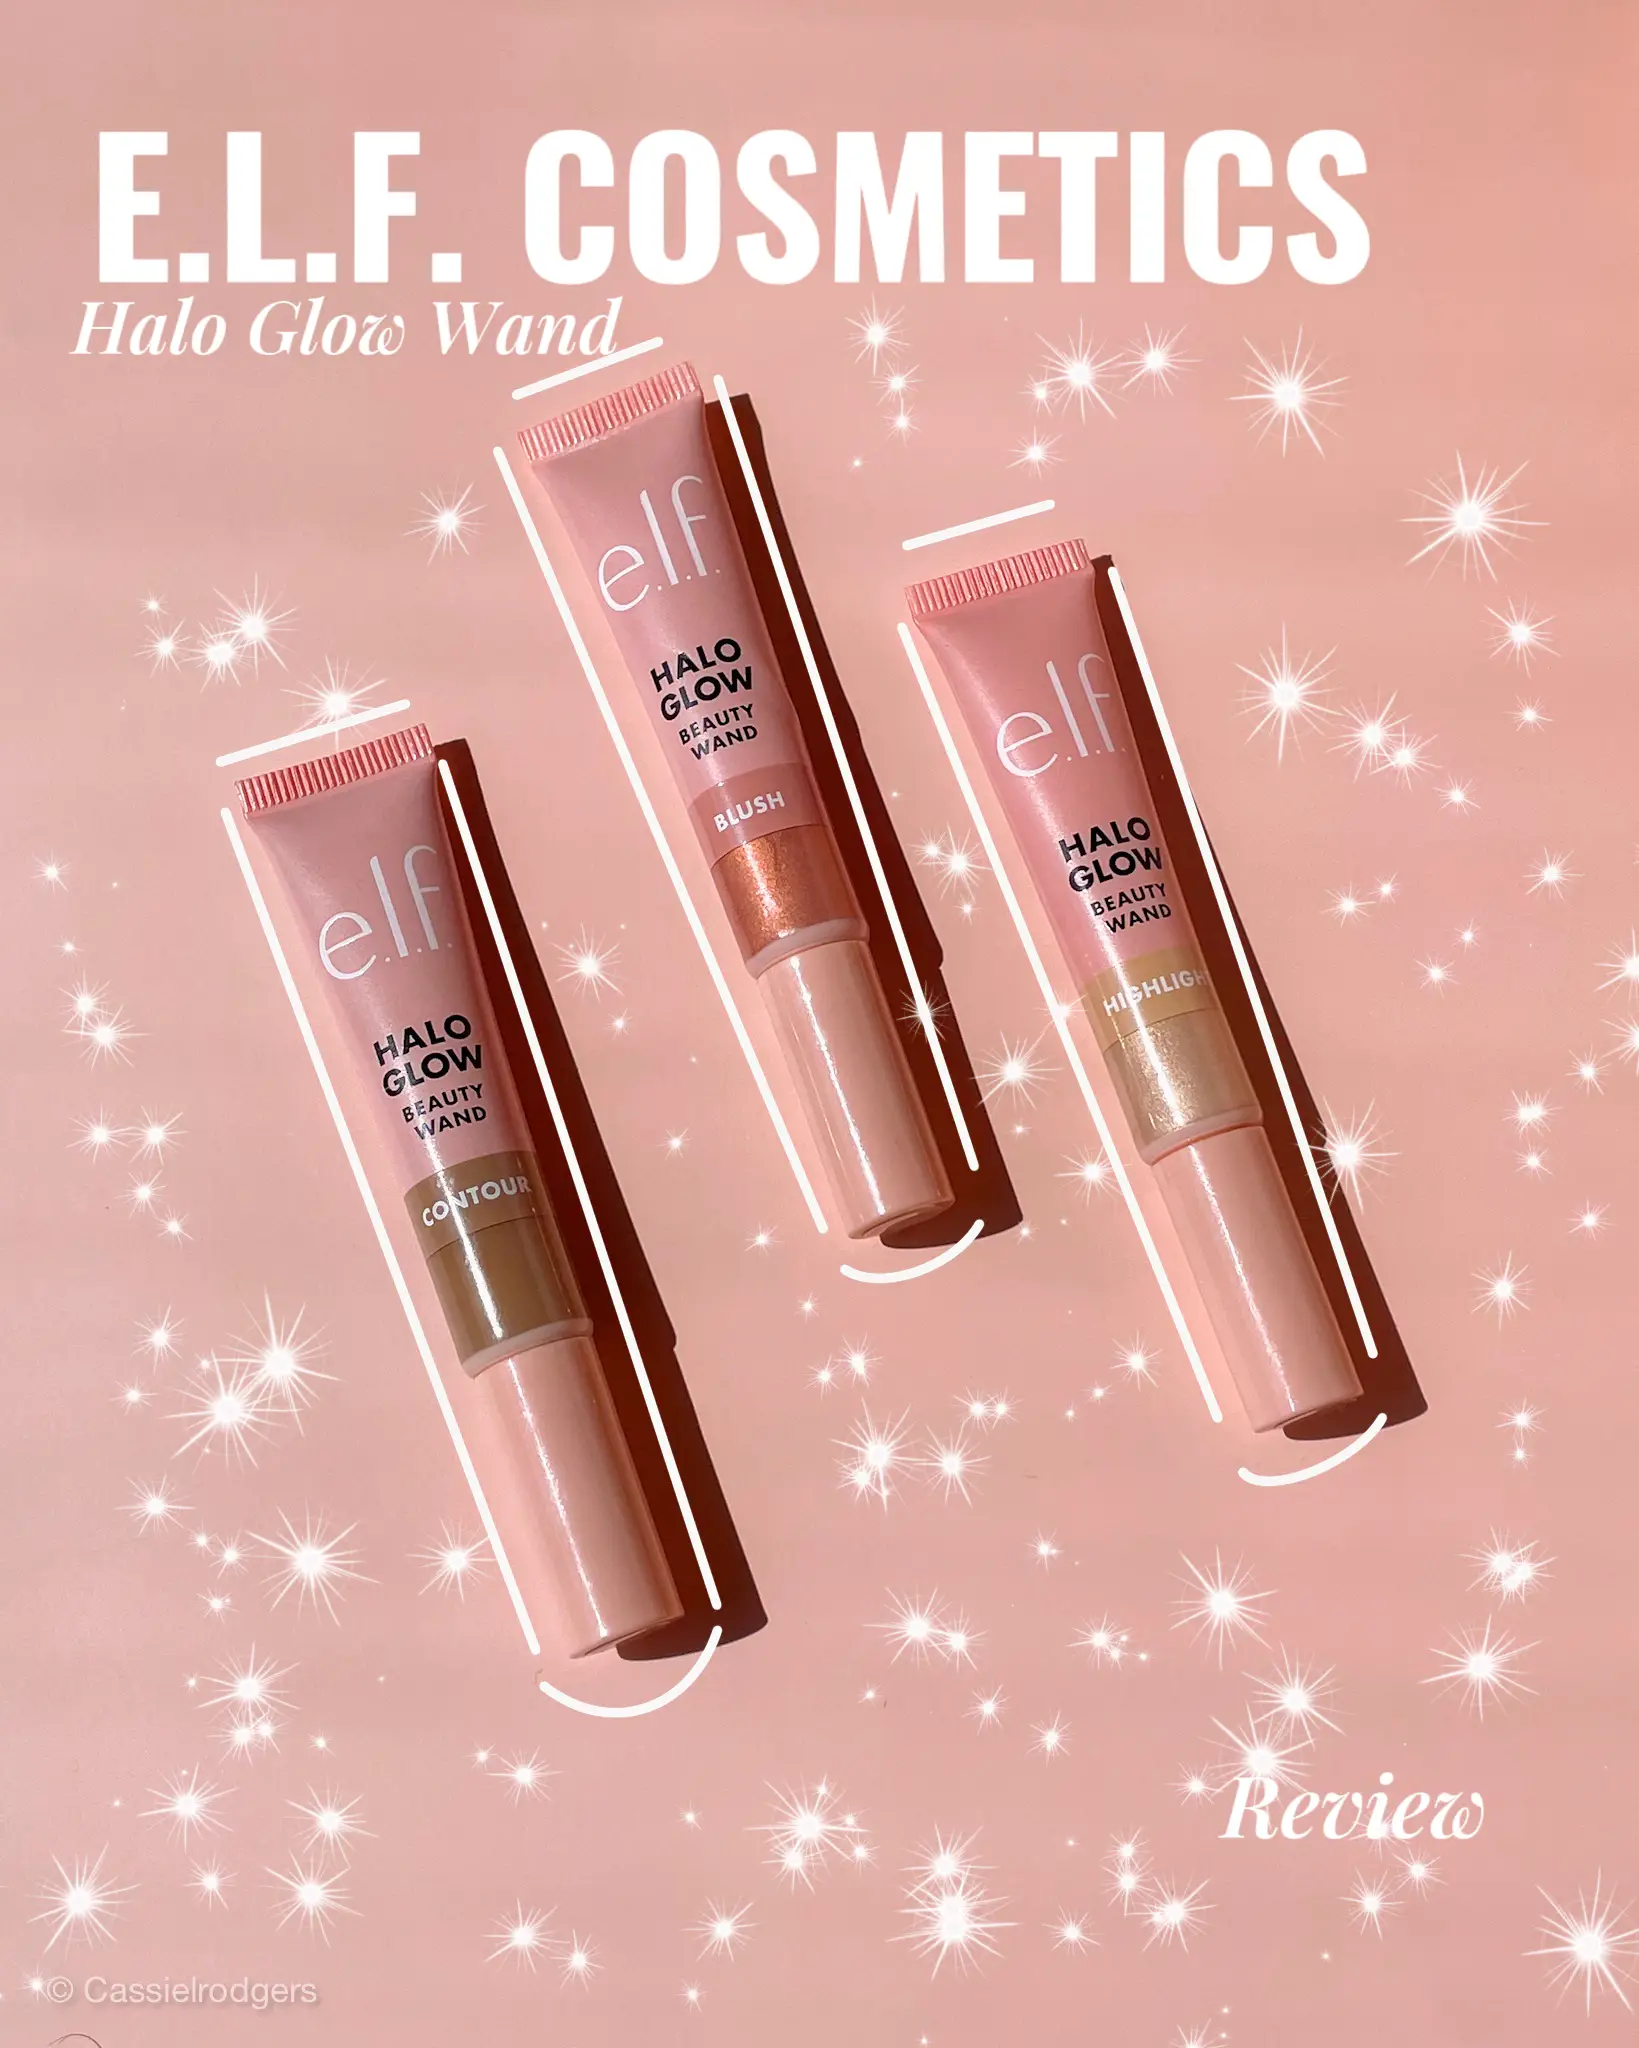 E.l.f. Cosmetics Halo Glow Wand Review With Photos